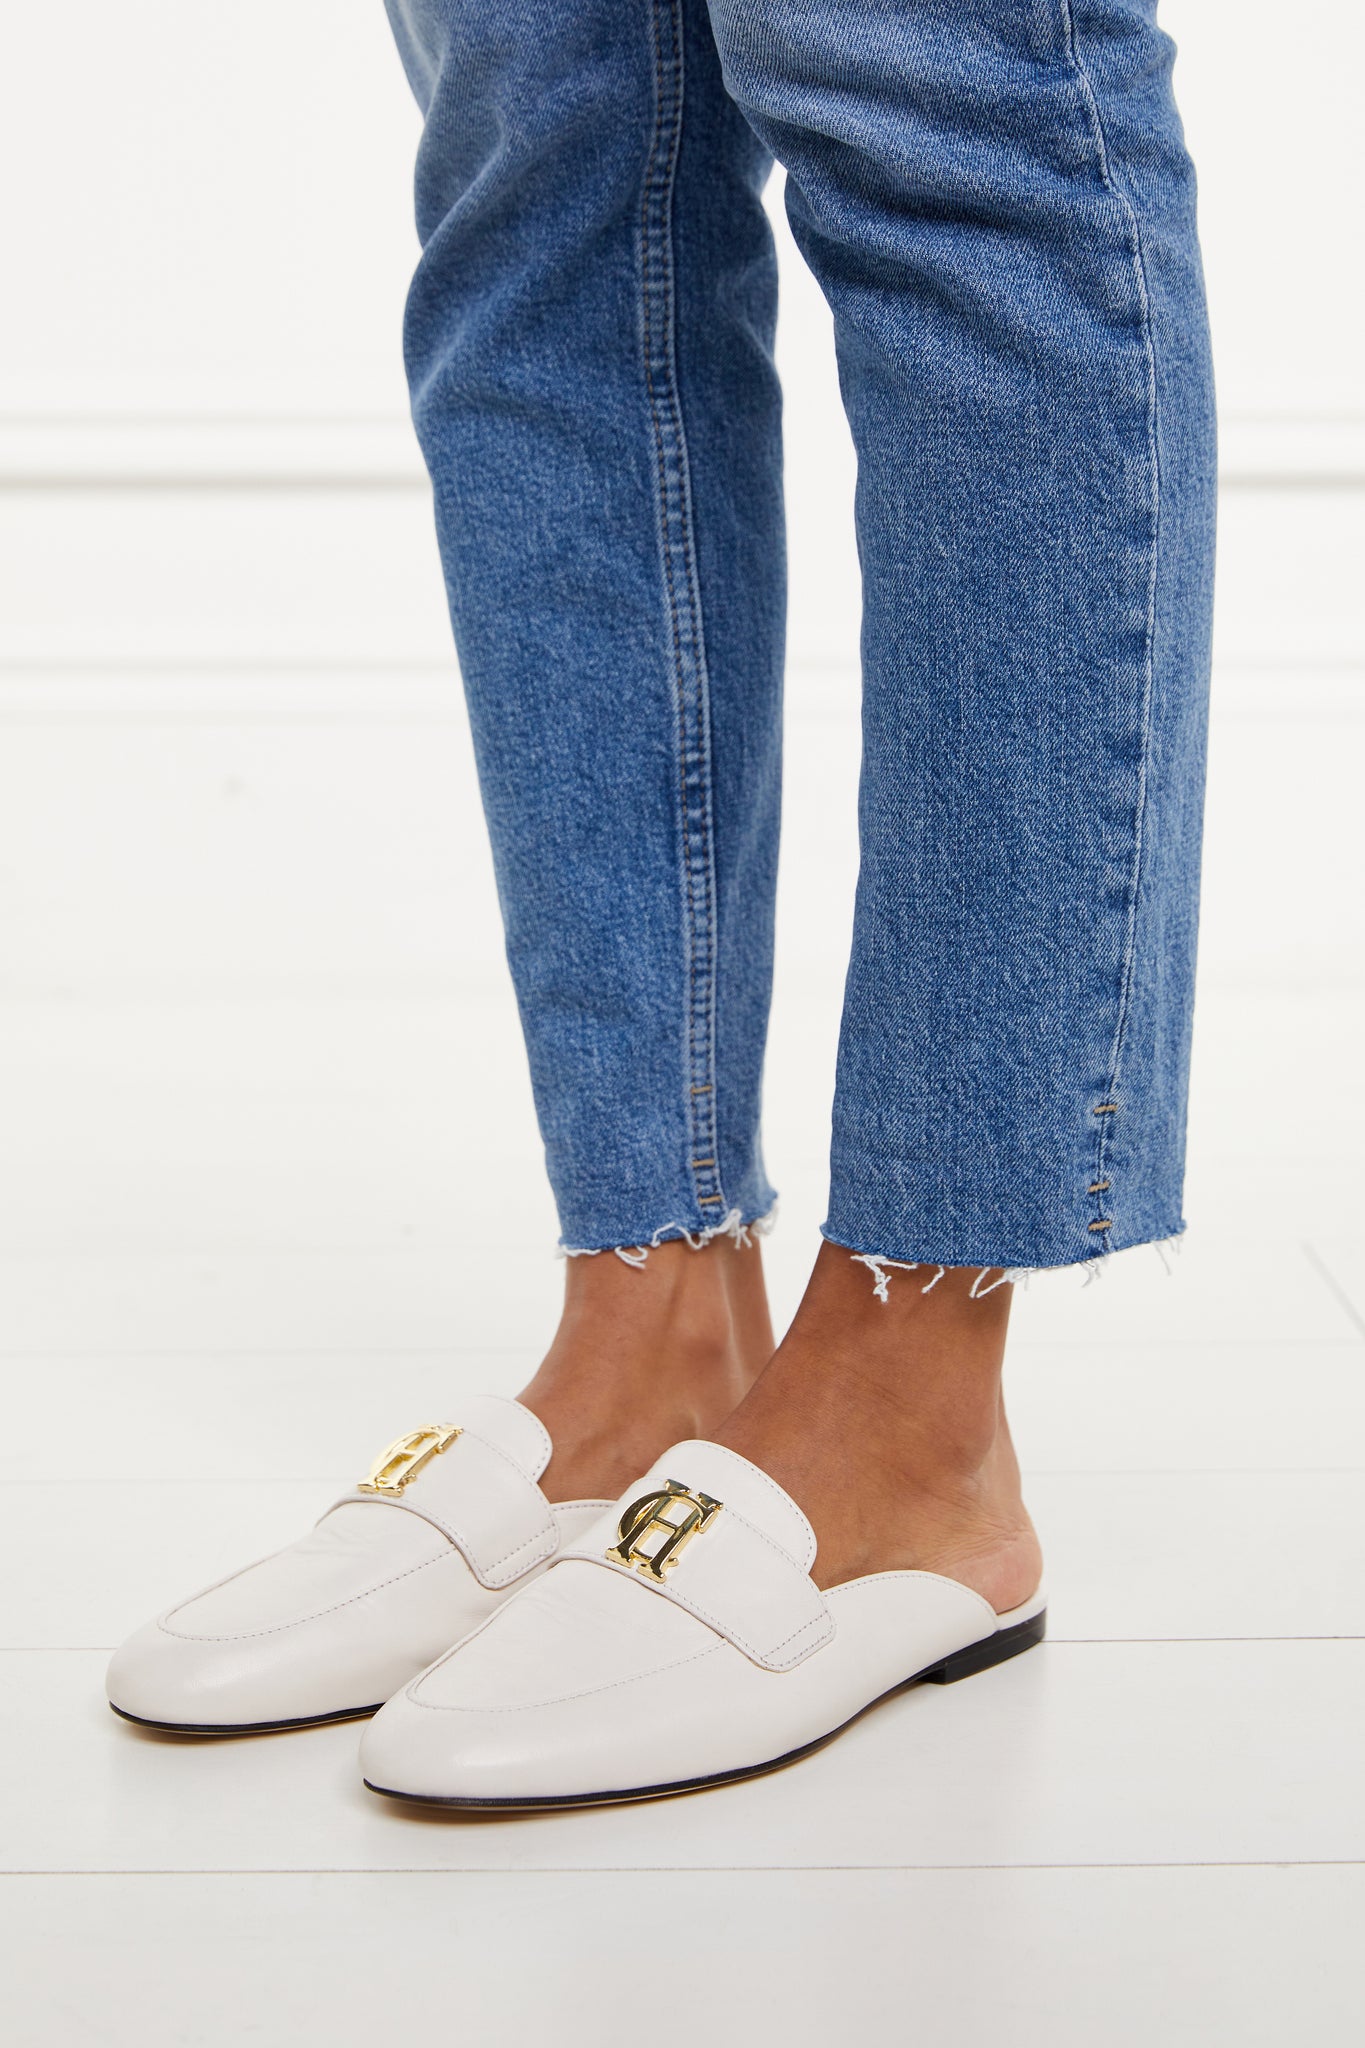 white leather backless loafers with a slightly pointed toe and gold hardware to the top worn with slim denim jeans with a frayed edge